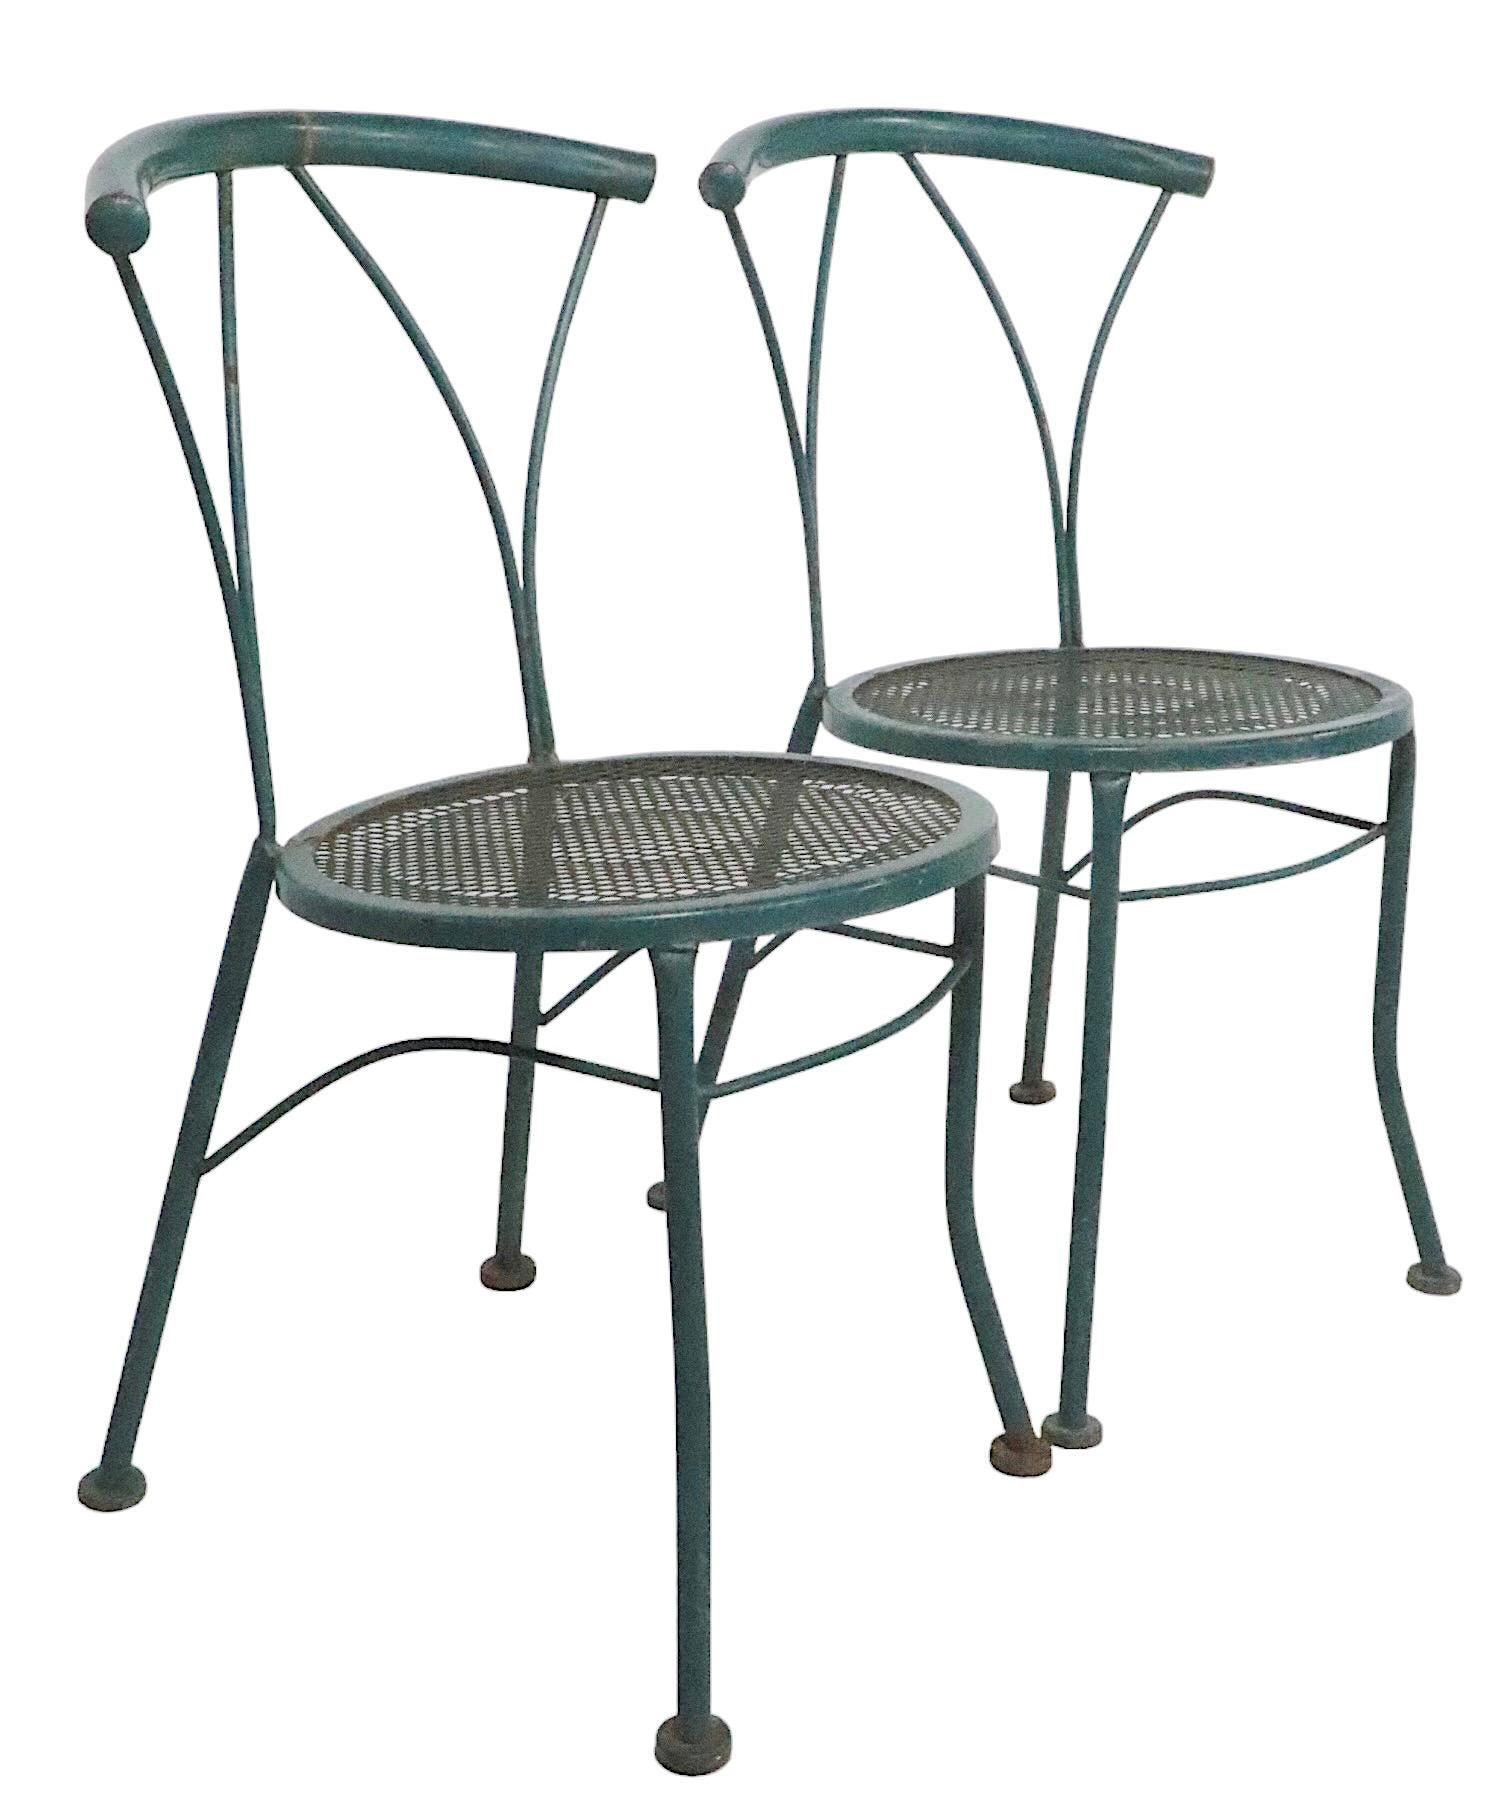 Pr. Wrought Iron and Metal Mesh Garden Patio Poolside Bistro Cafe  Dining Chairs In Good Condition For Sale In New York, NY